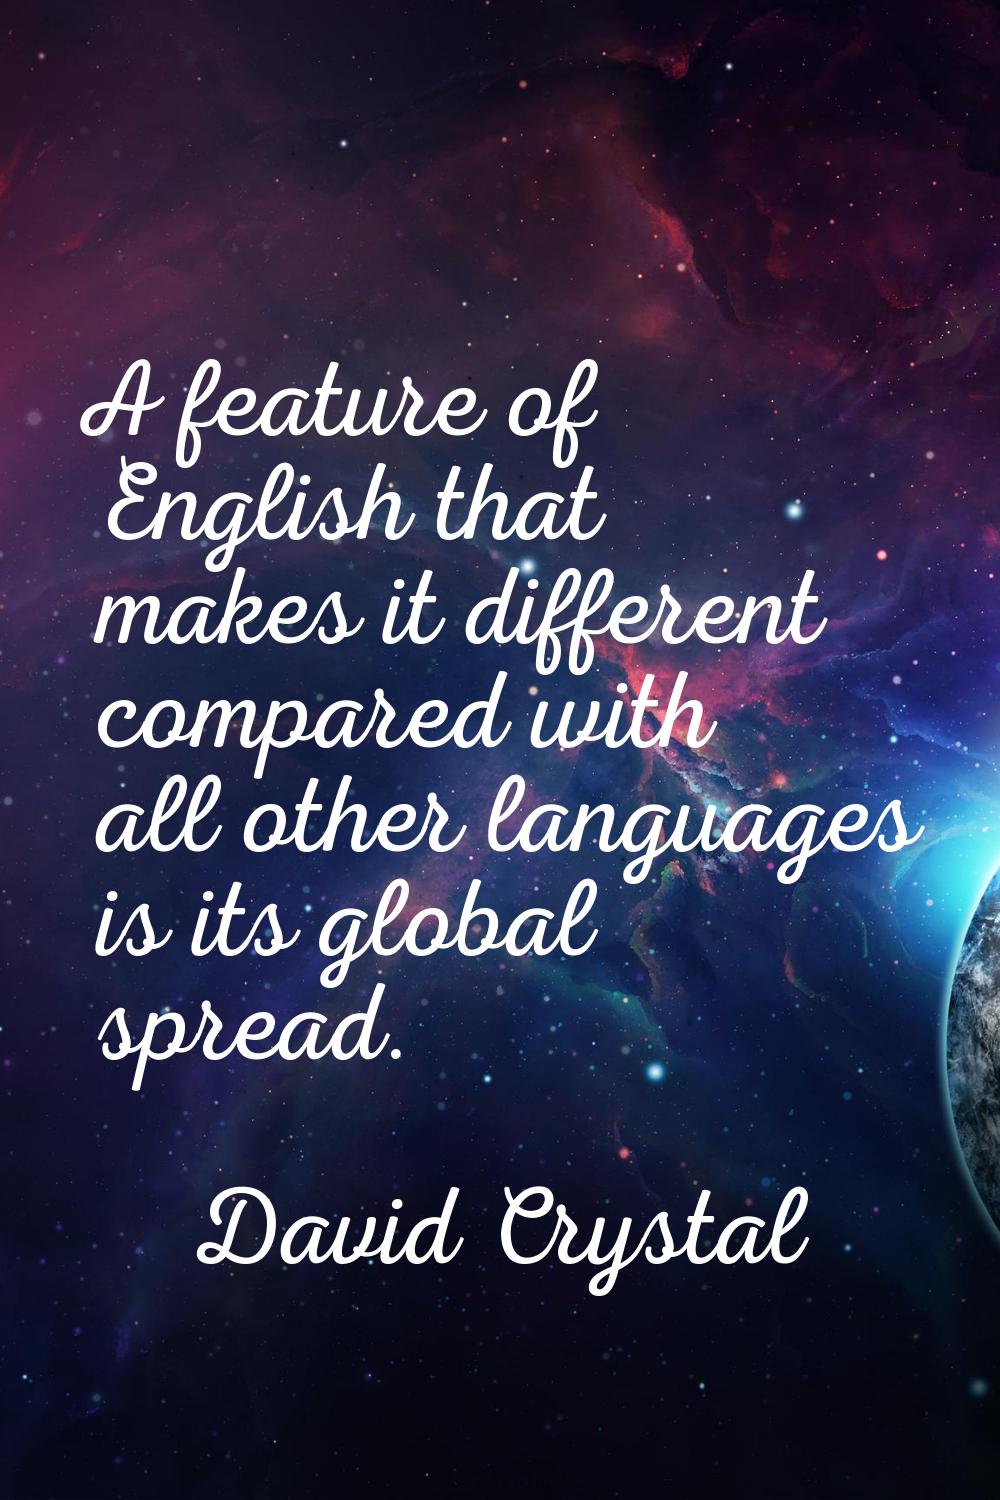 A feature of English that makes it different compared with all other languages is its global spread